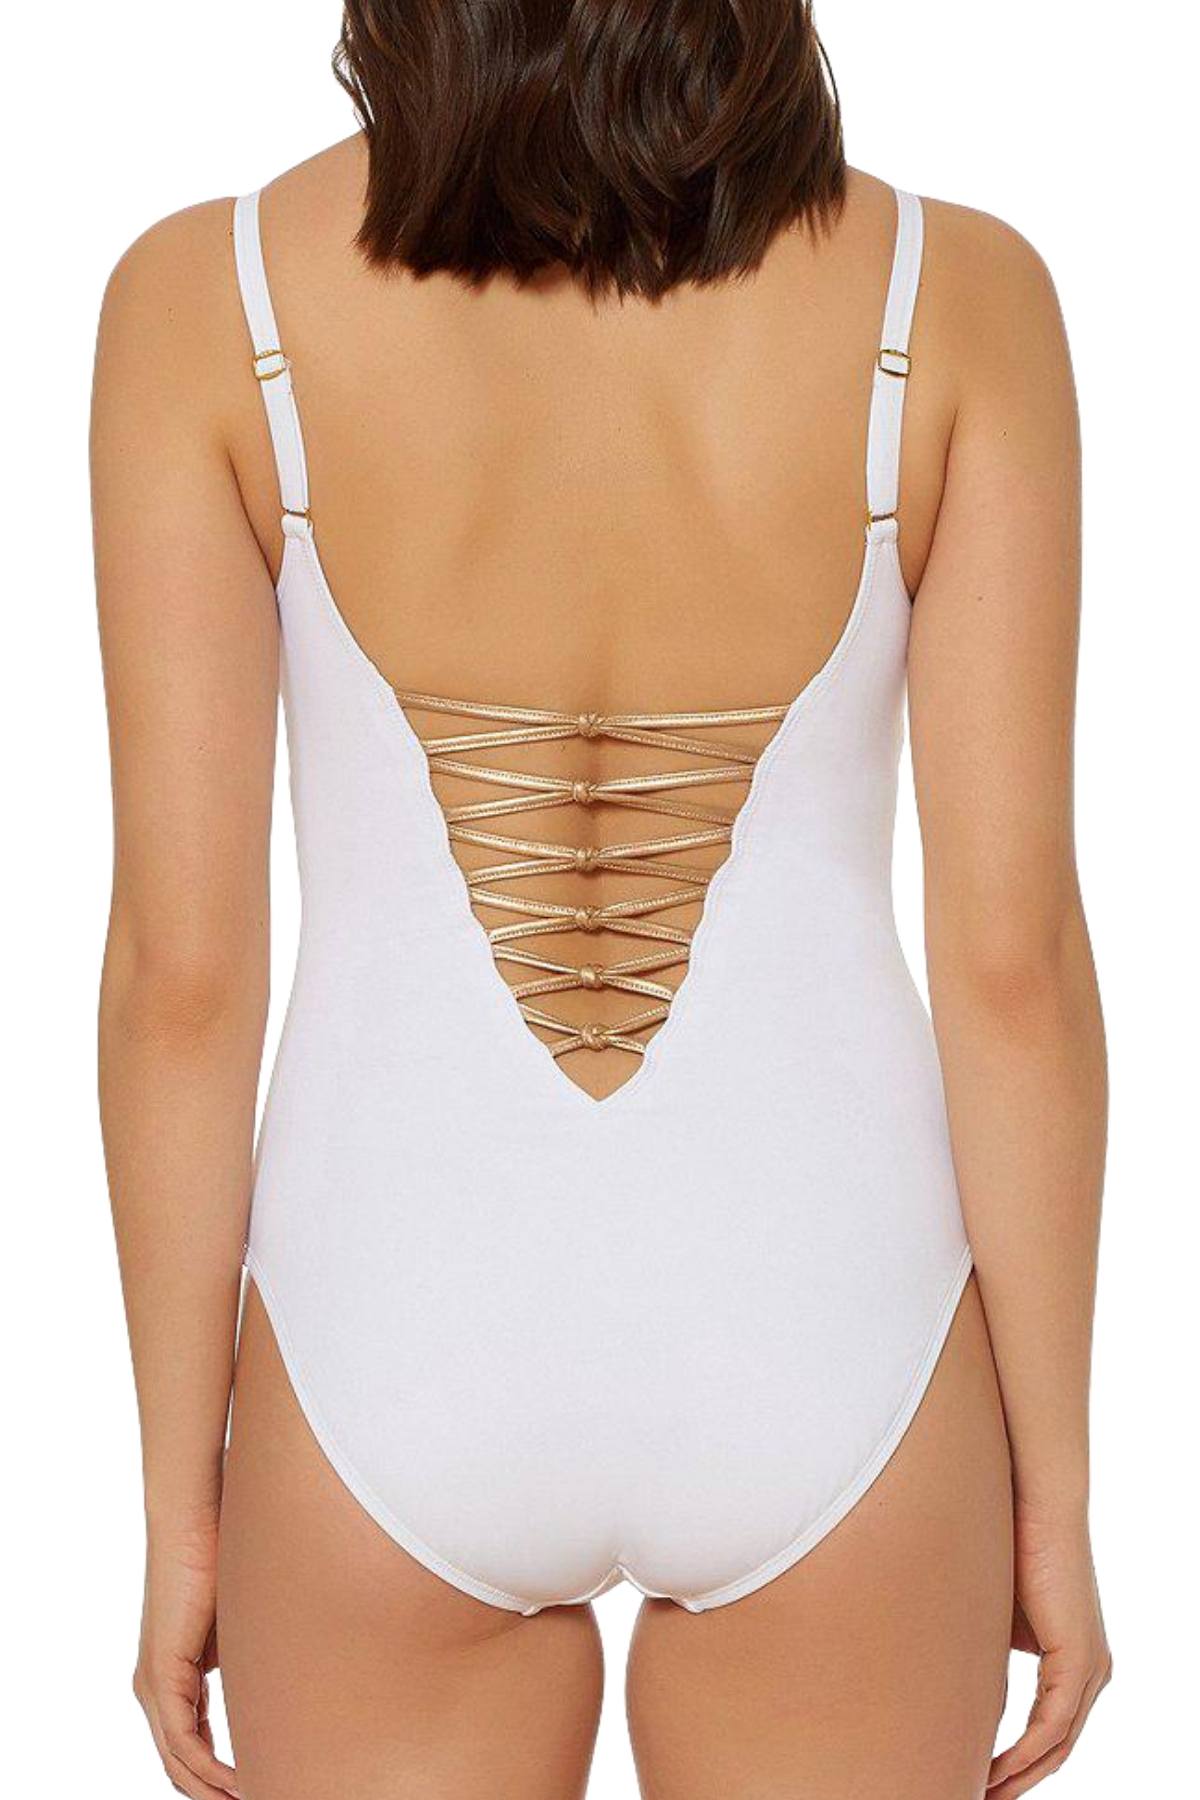 BLEU Rod Beattie White/Rose-Gold Tiered Knots Lace-Up Plunging One-Piece Swimsuit